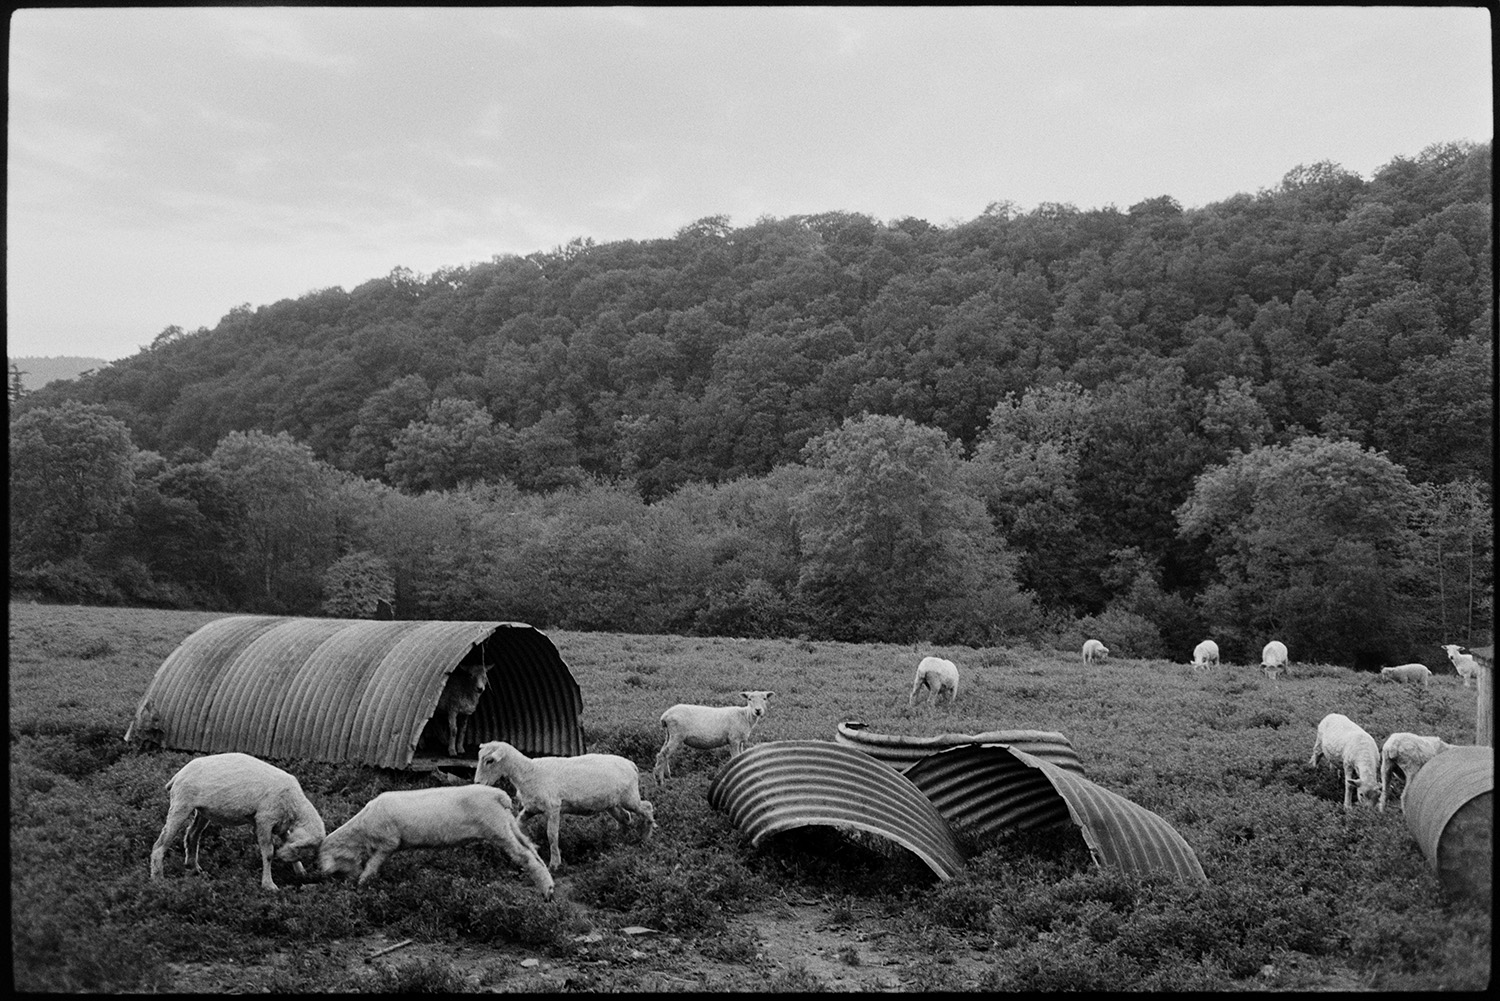 Sheep in field.
[Recently shorn sheep grazing in a field at Millhams, Dolton, with some standing in a partly collapsed corrugated iron shelter, and a view of woodland in the background.]